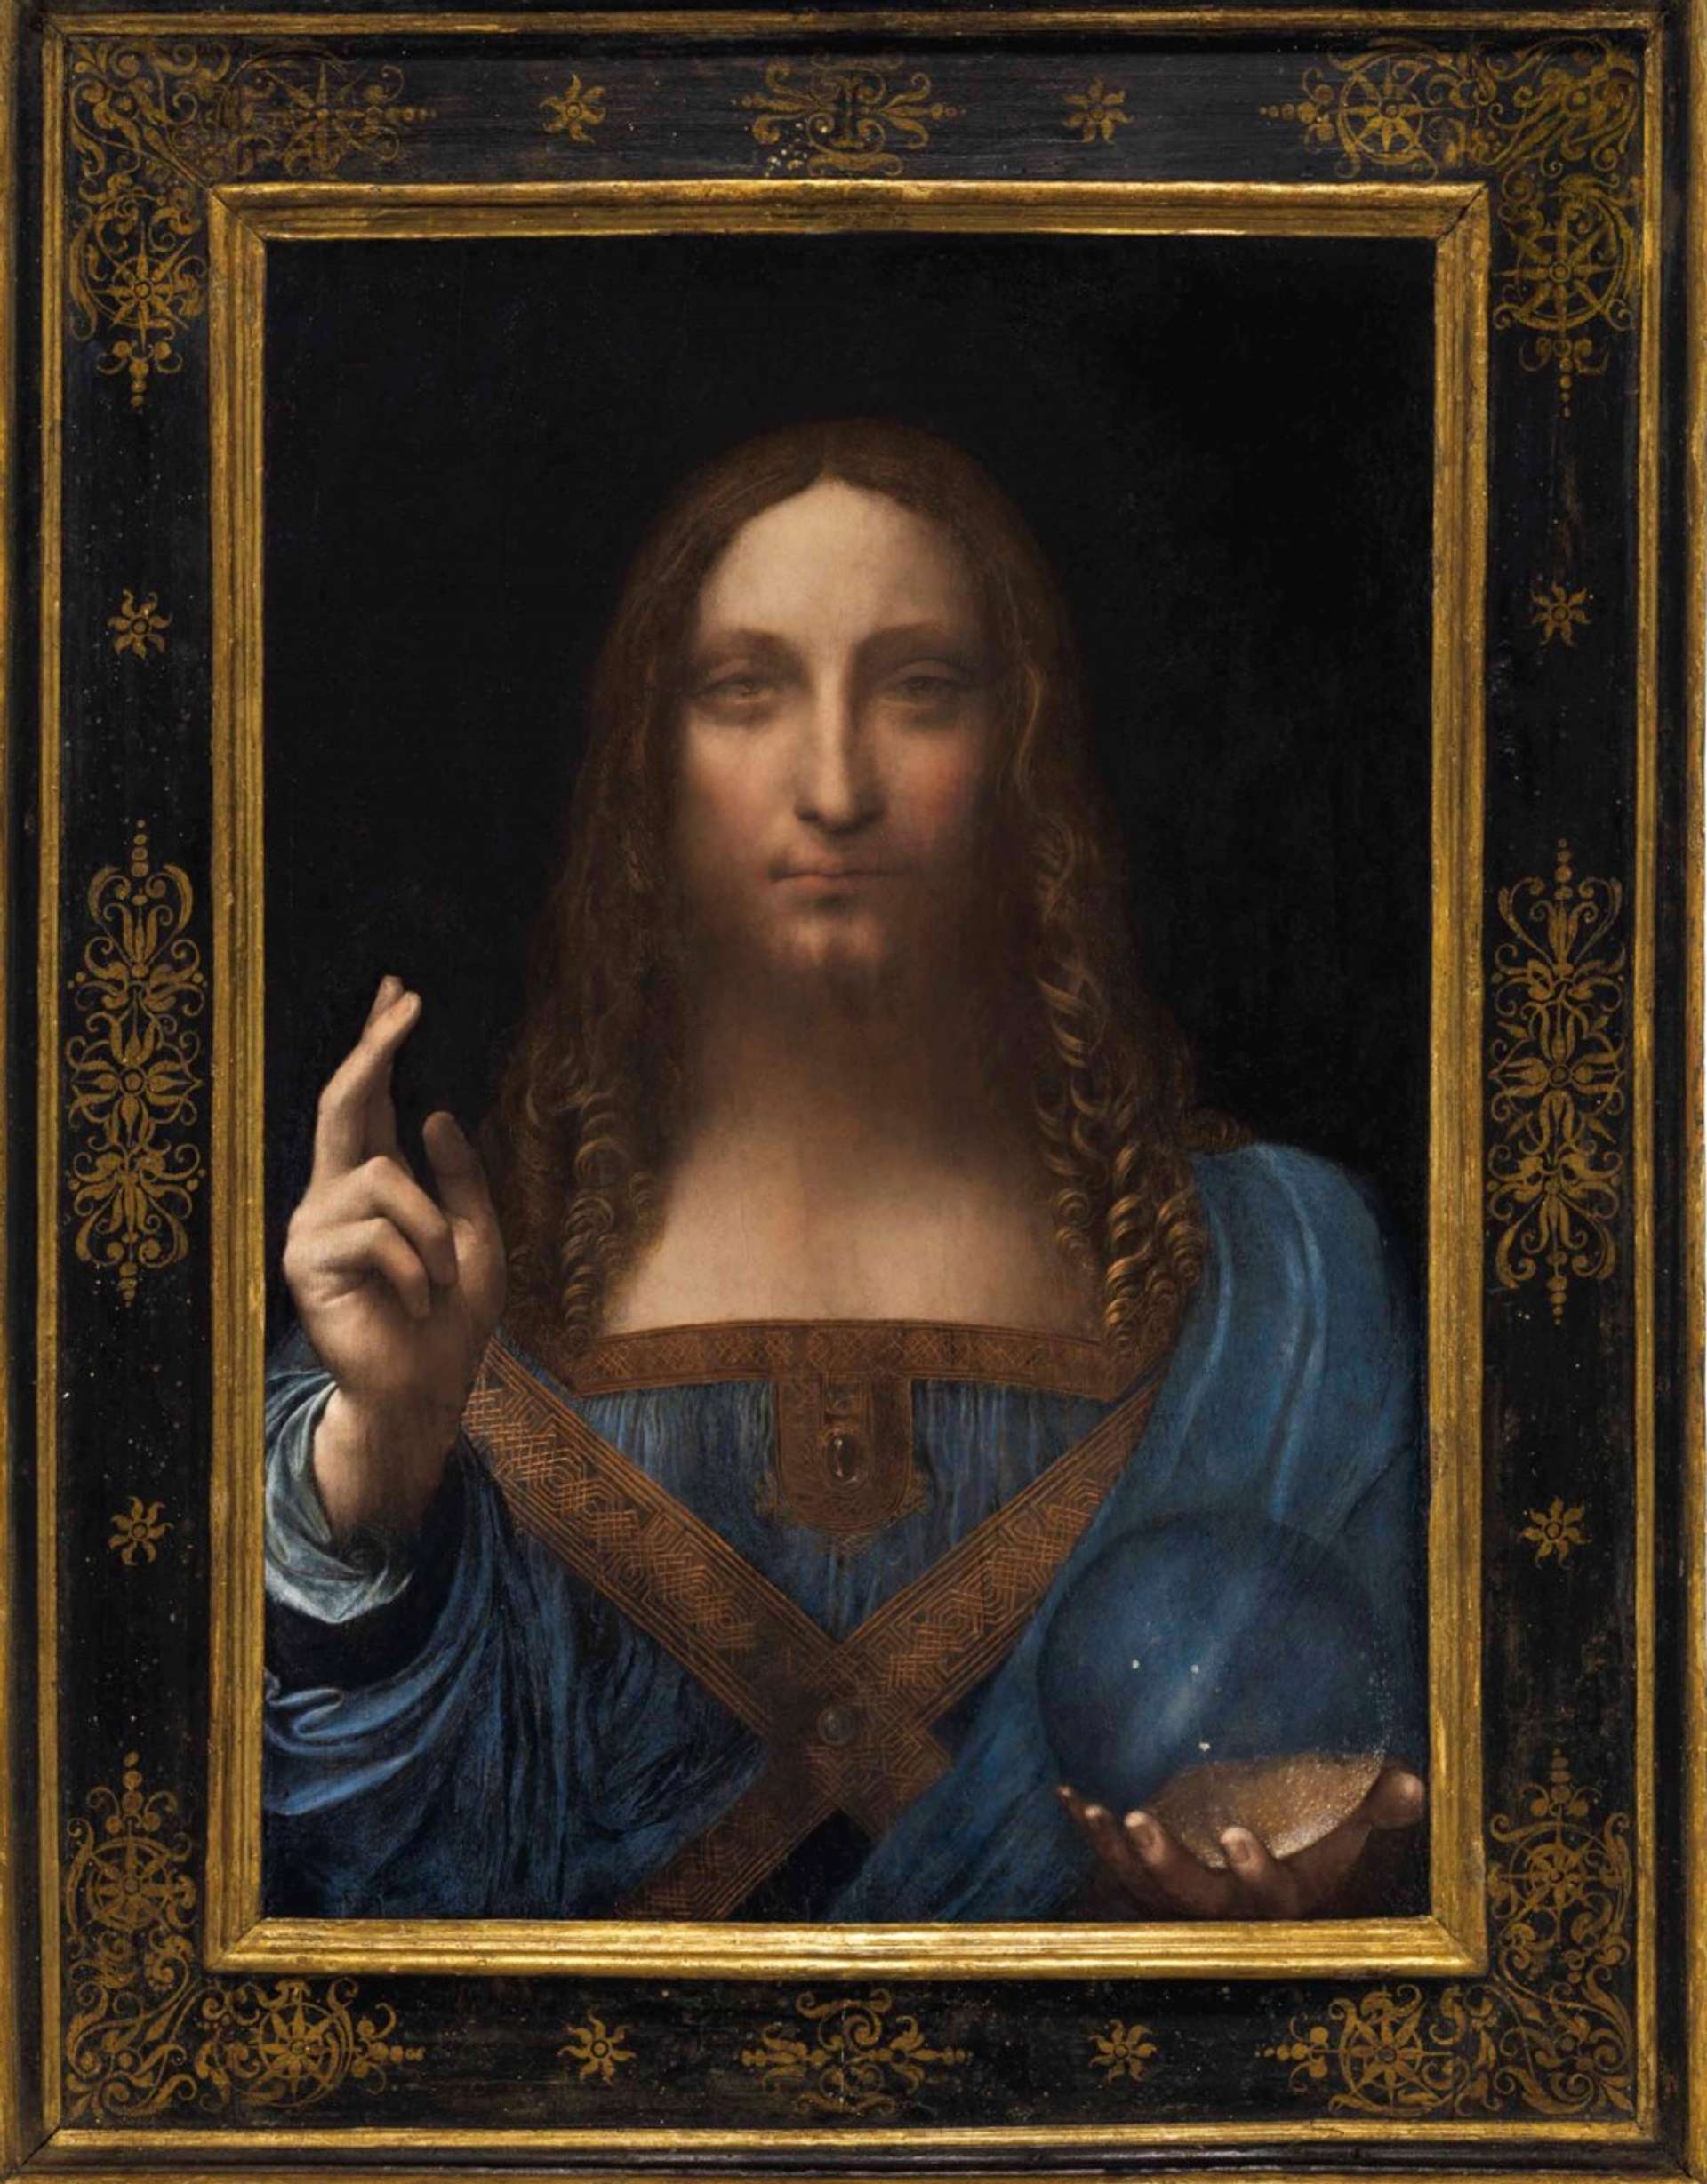 An image of the painting Salvator Mundi, attributed to Leonardo da Vinci. It shows Jesus in a blue dress, holding an orb in his right hand and blessing the viewer with his left hand.